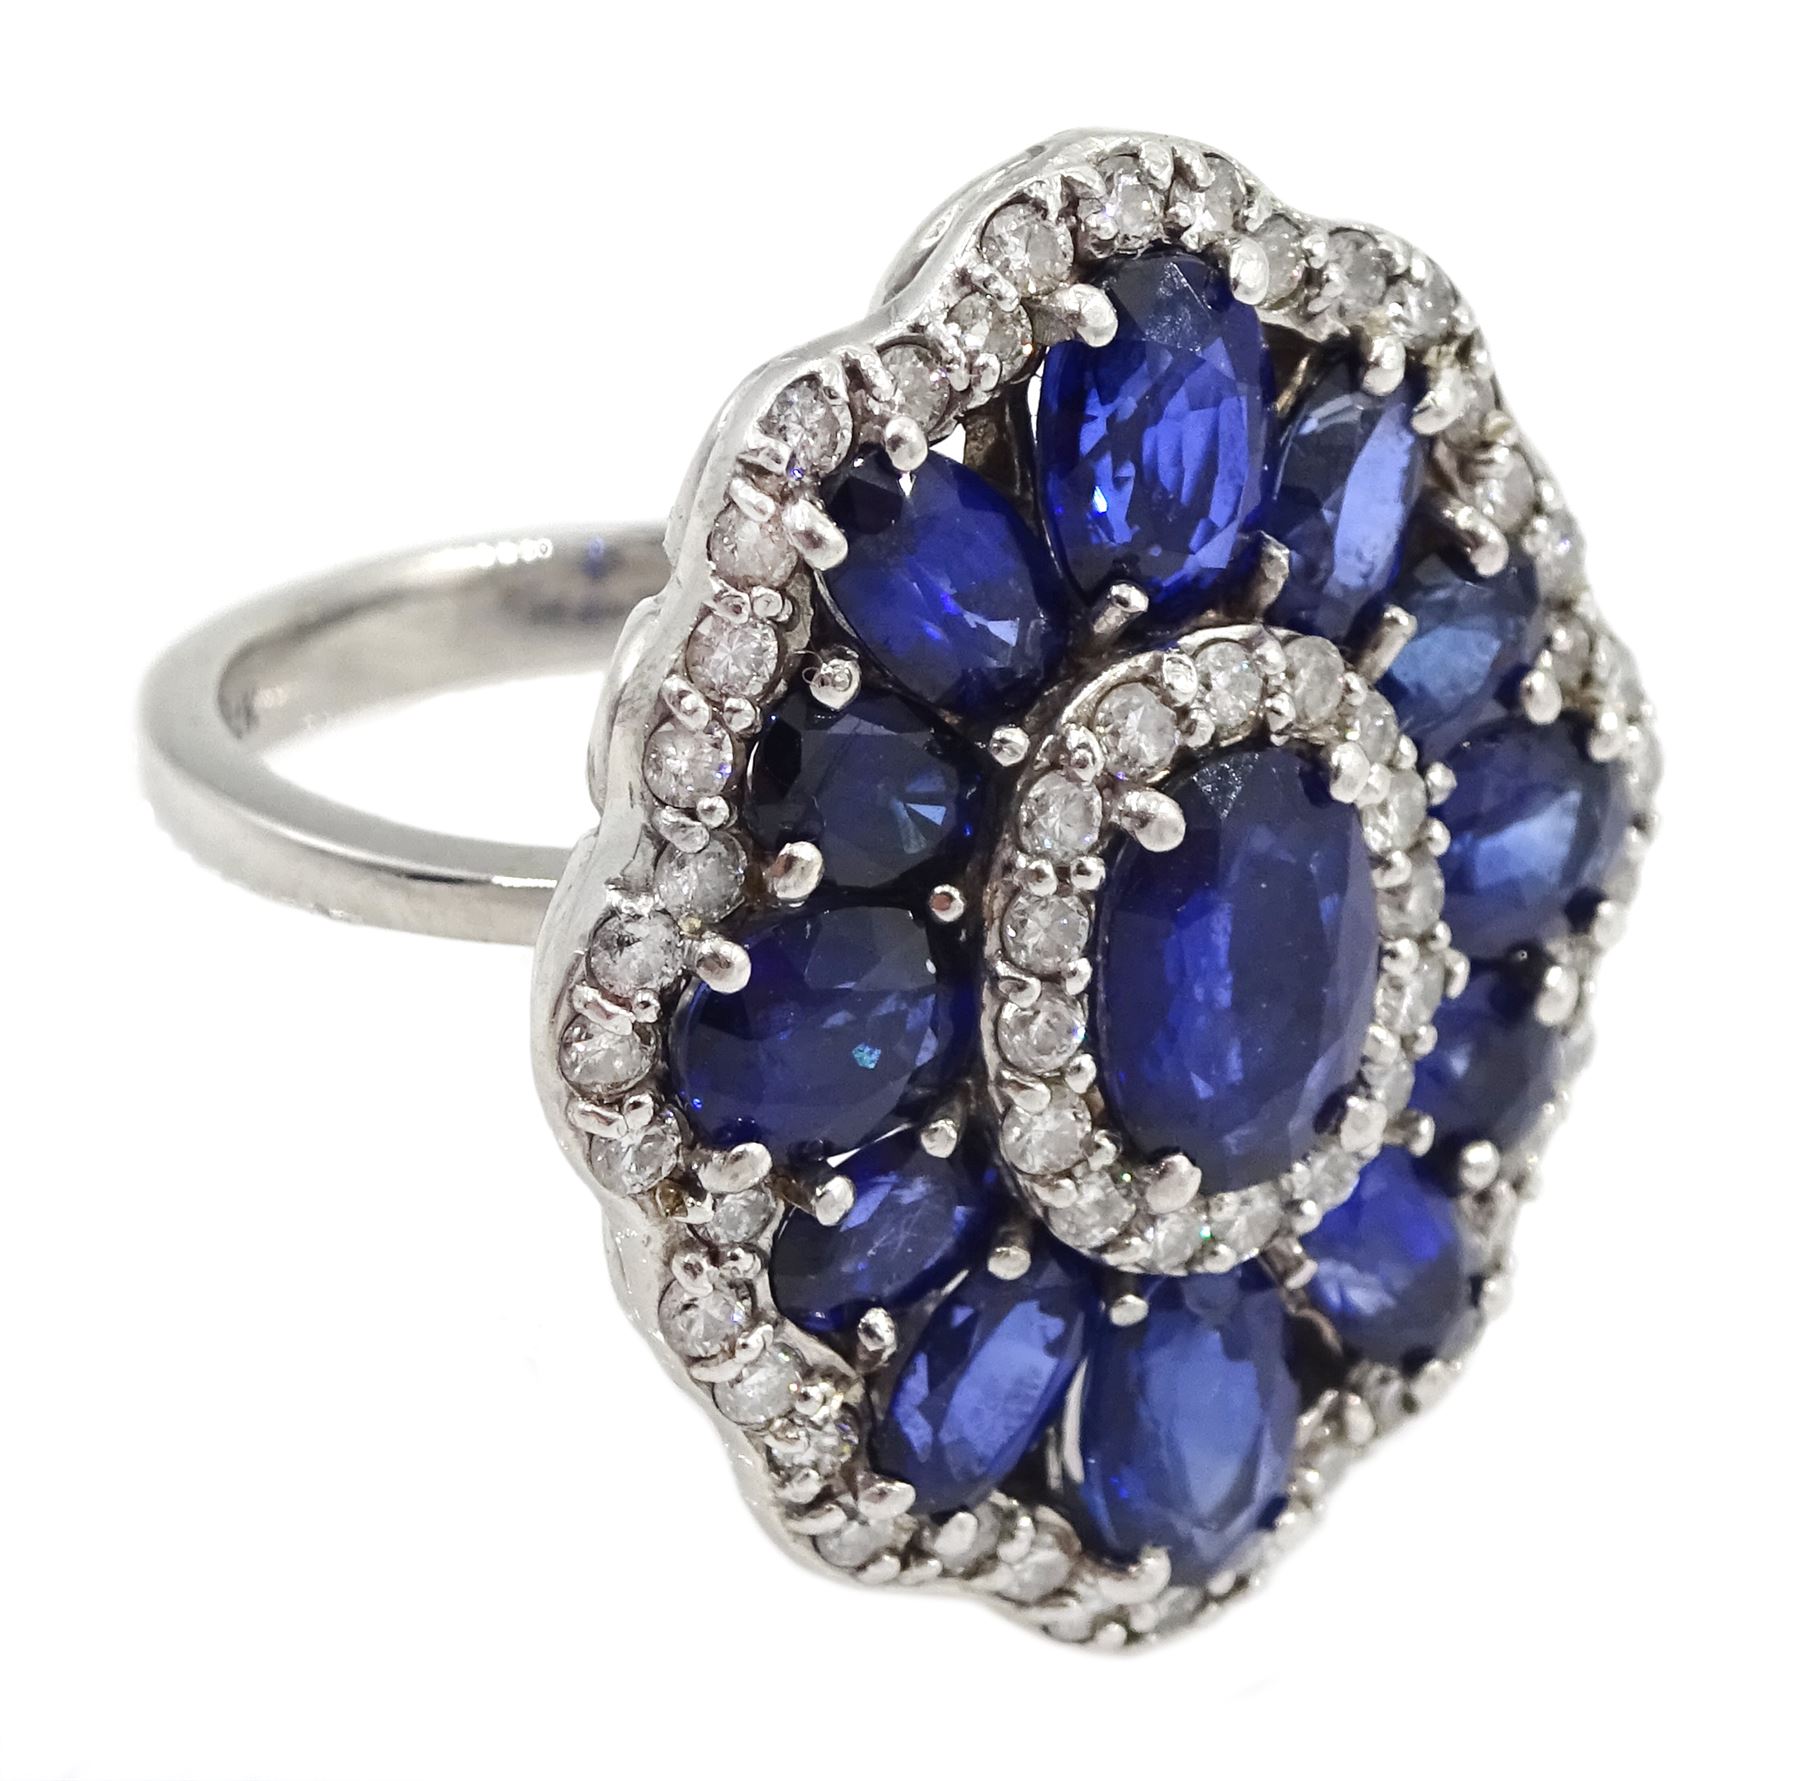 White gold oval sapphire and diamond dress ring by Effy - Image 3 of 4